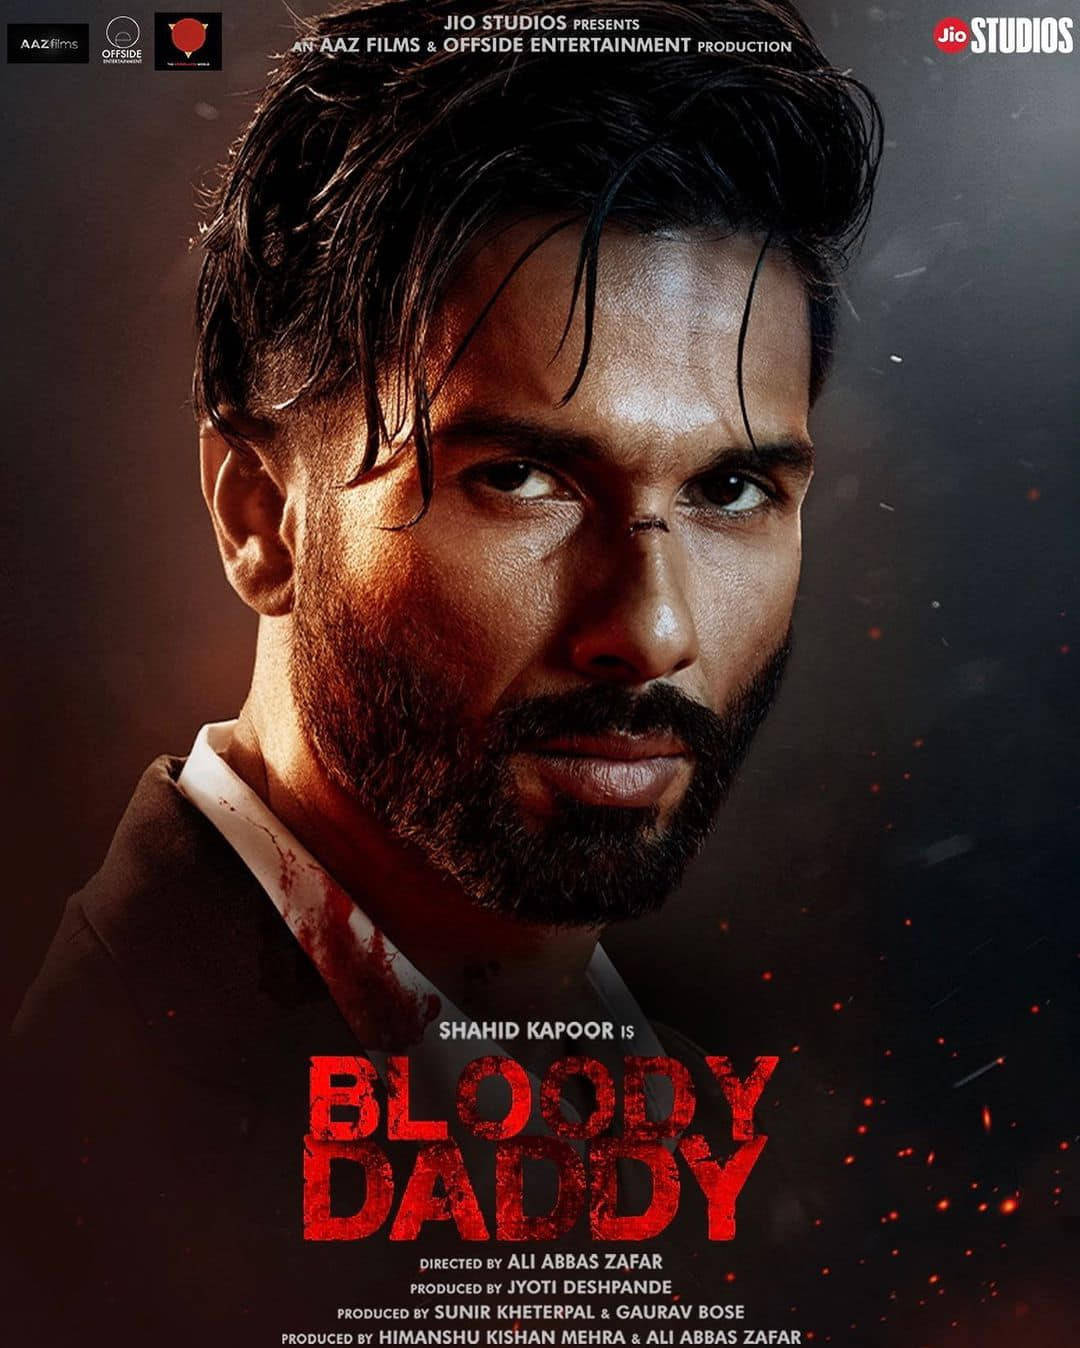 Shahid Kapoor's "Bloody Daddy" OTT Release Date, Movie Cast & Crew, Budget, And Much More